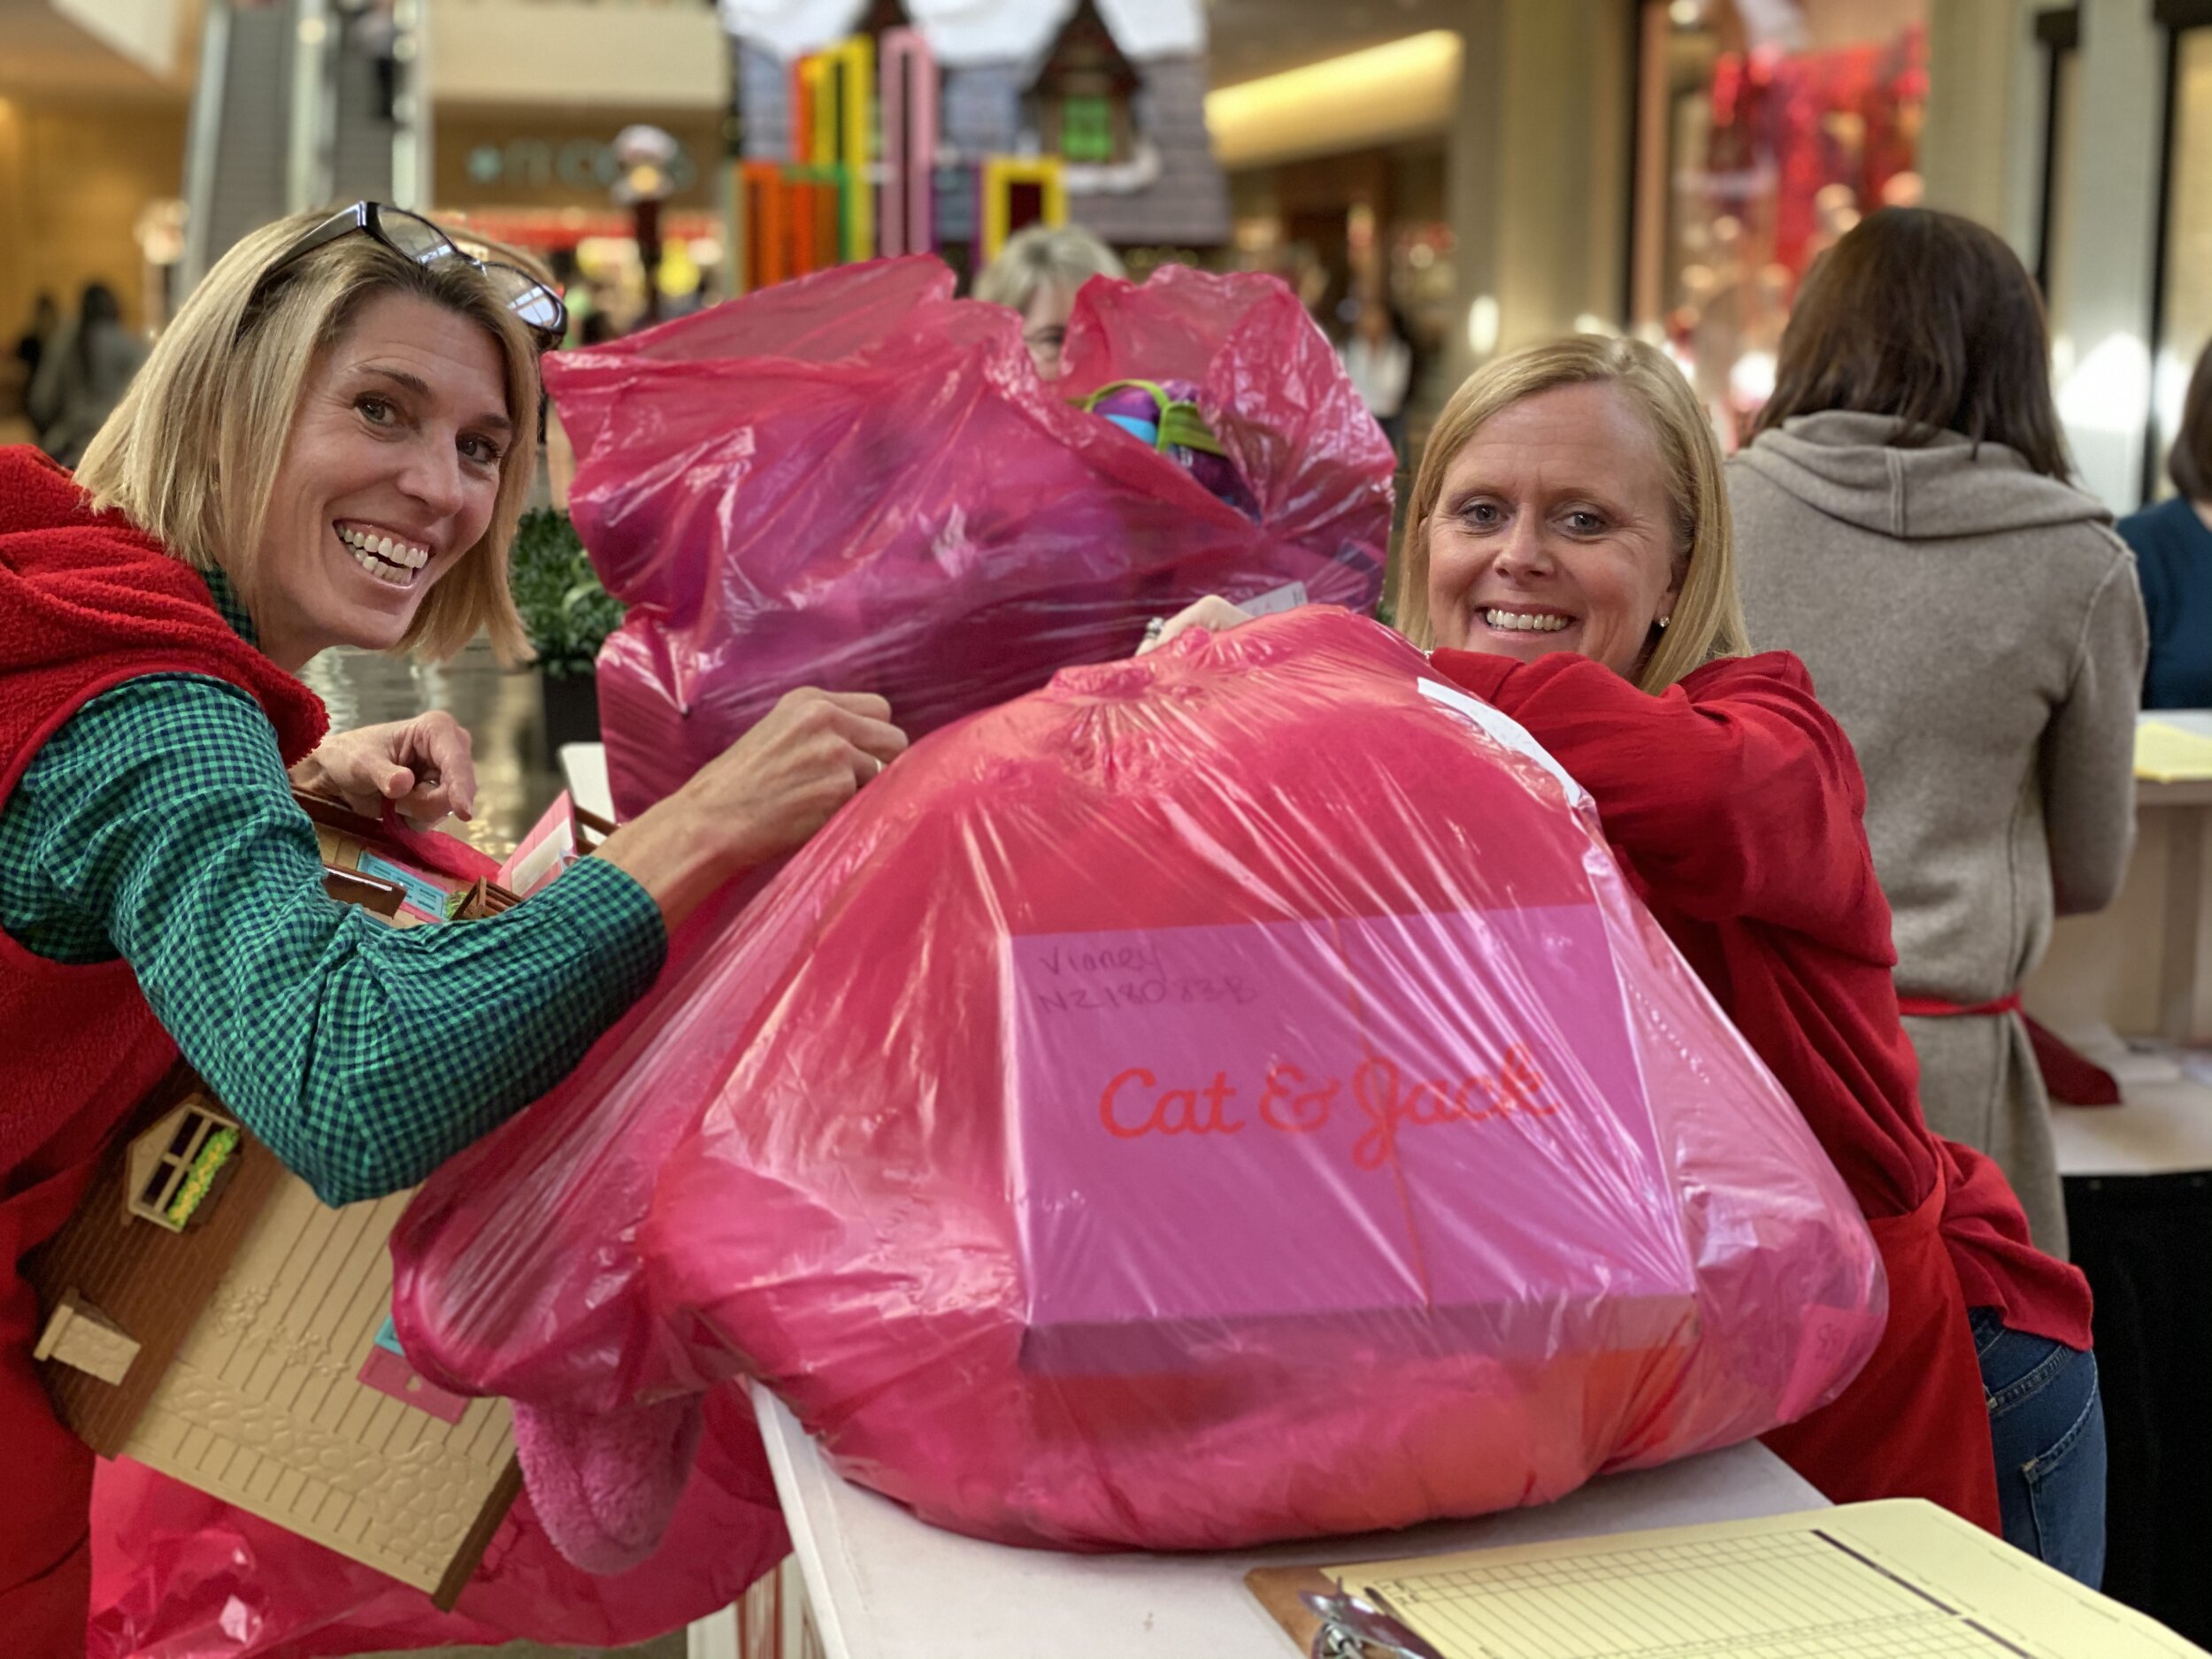  Paula Hayes and Cathy MacDowell checking in gifts for Angel Tree recipients. Paula invited friends from her tennis team to join her in volunteering seven years ago. Paula said that the group had so much fun that we add it to our calendar every year.